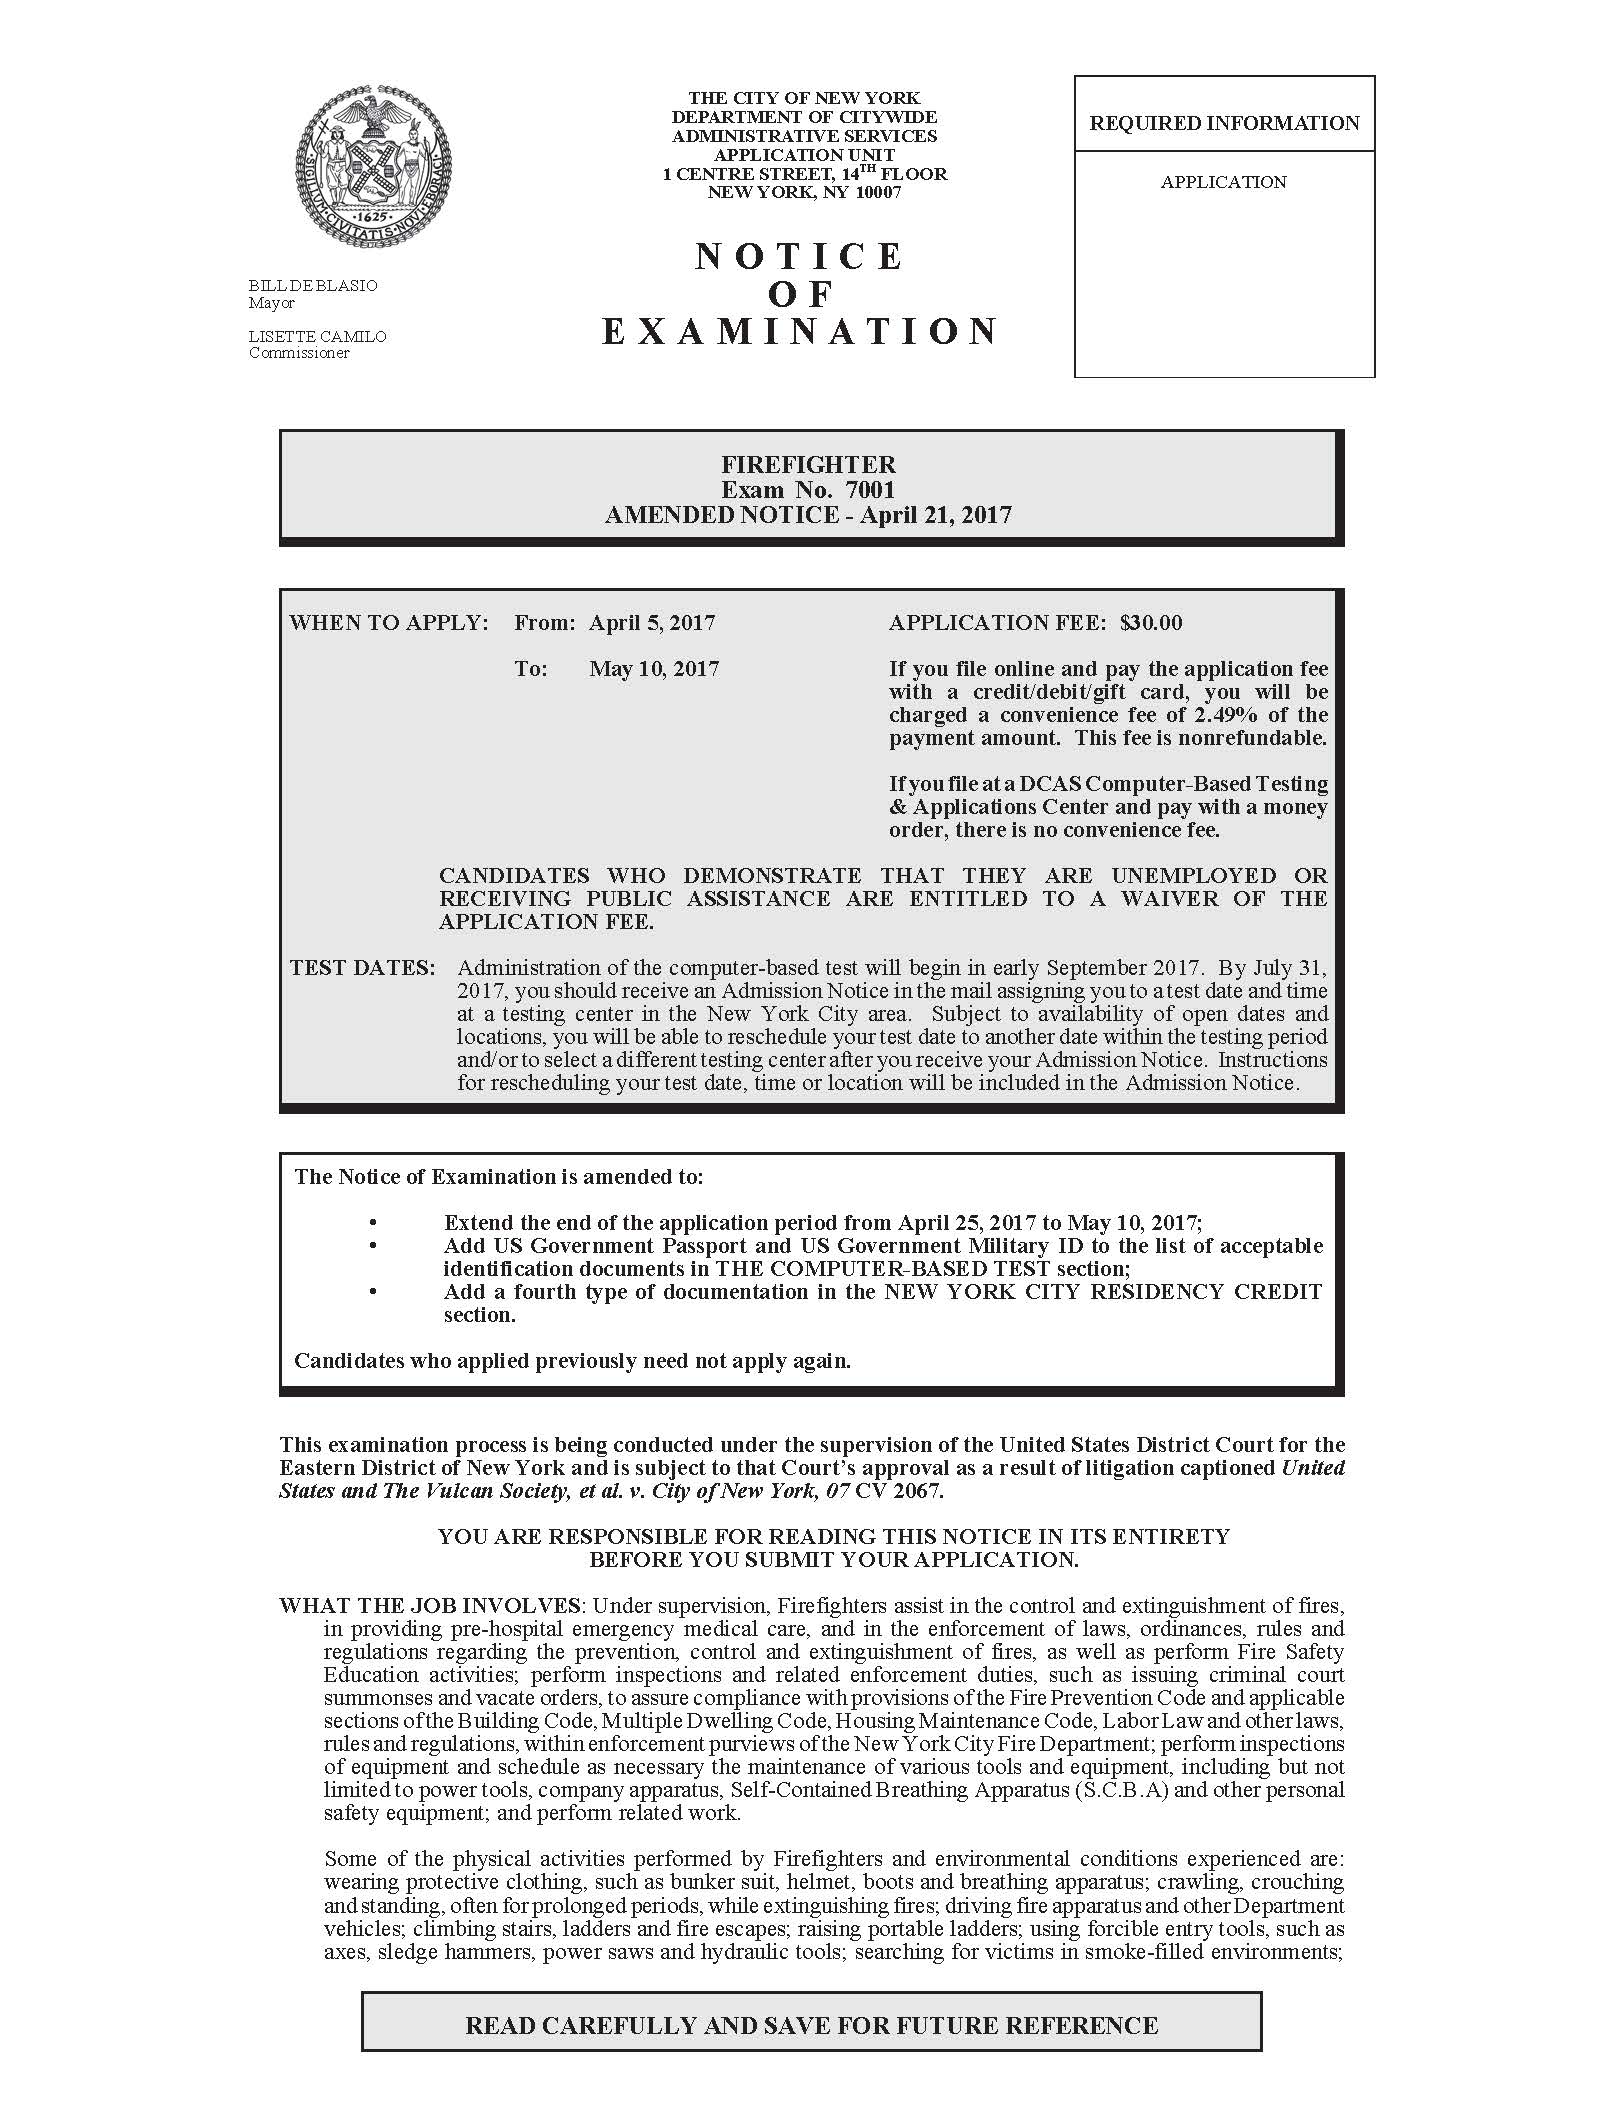 fdny place of assembly permit quick print